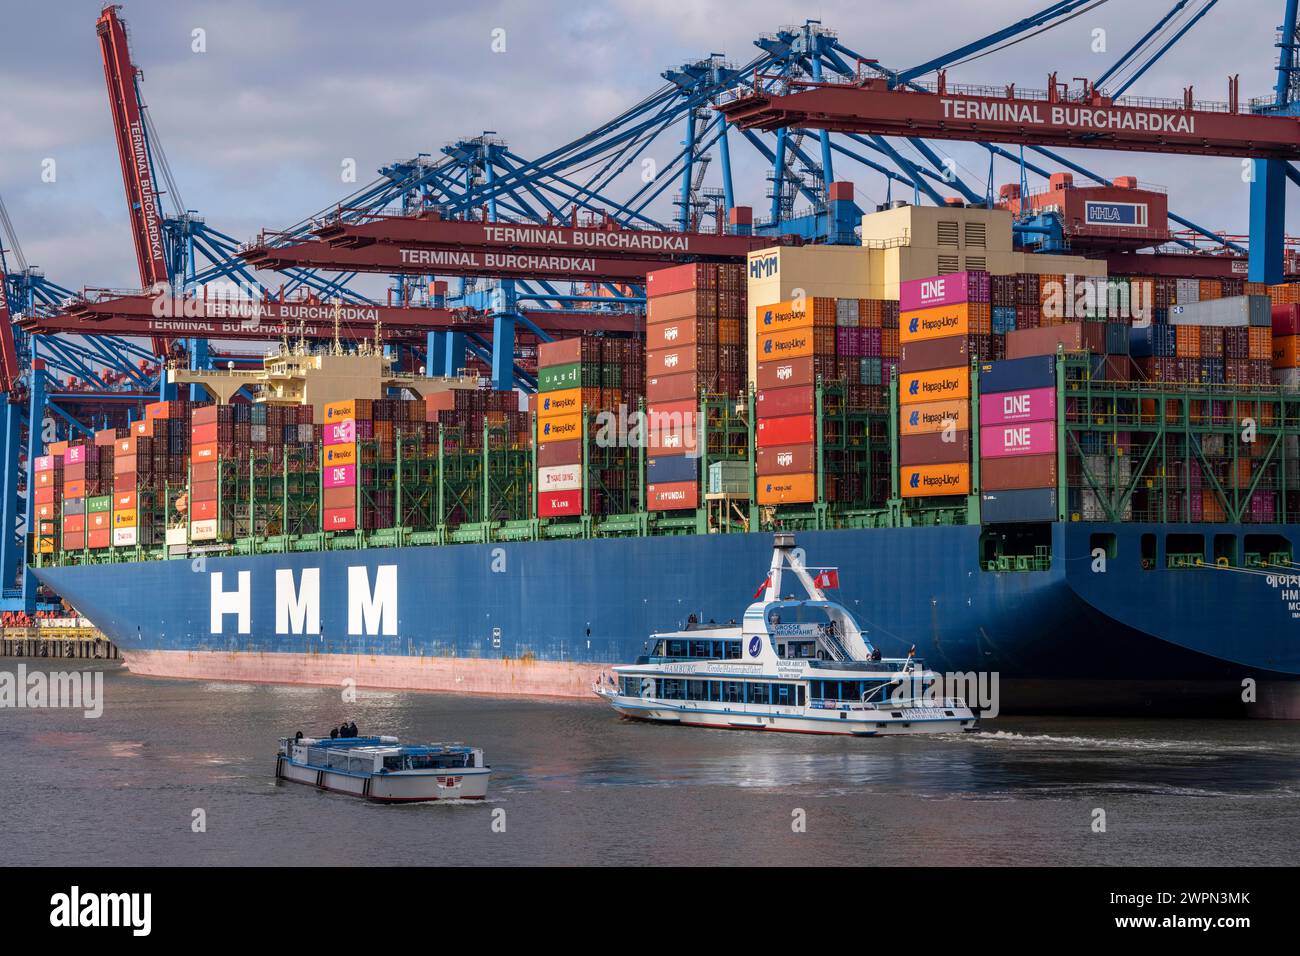 Port tour in Waltershofer Hafen, HHLA Container Terminal Burchardkai, HMM Nuri container freighter, container ship, Hamburg, Germany Stock Photo